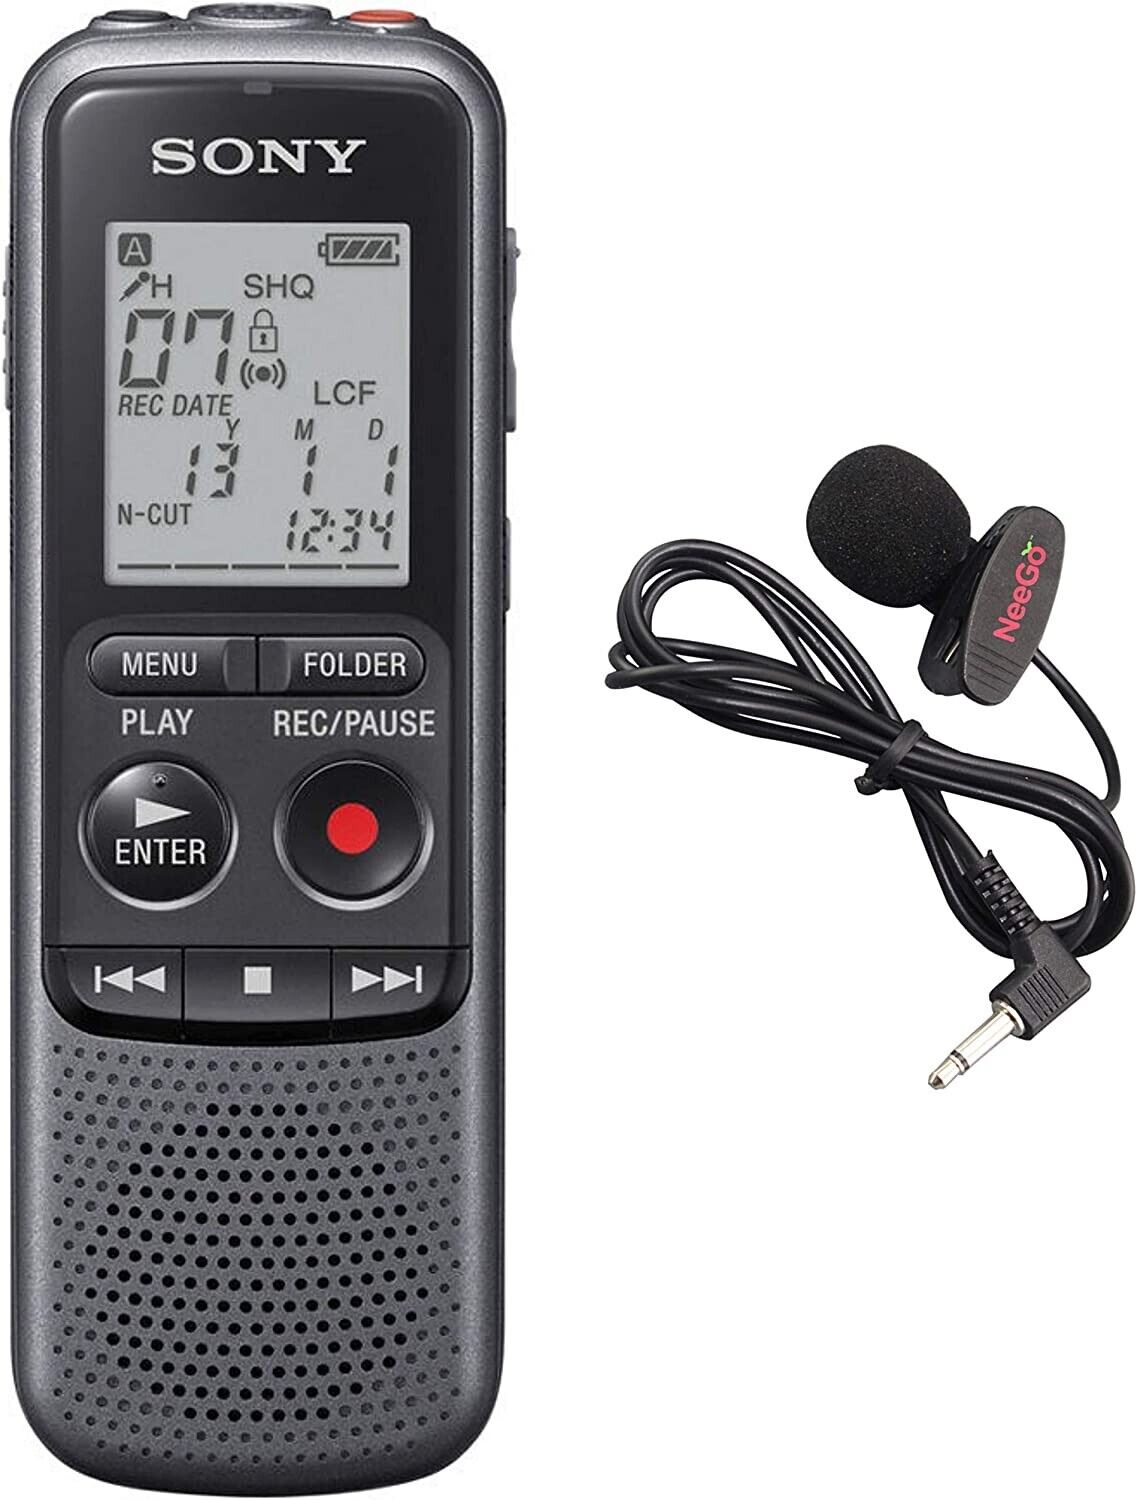 Sony Digital Voice Recorder With Mic and USB. 4GB Memory. Noise Cancelation.